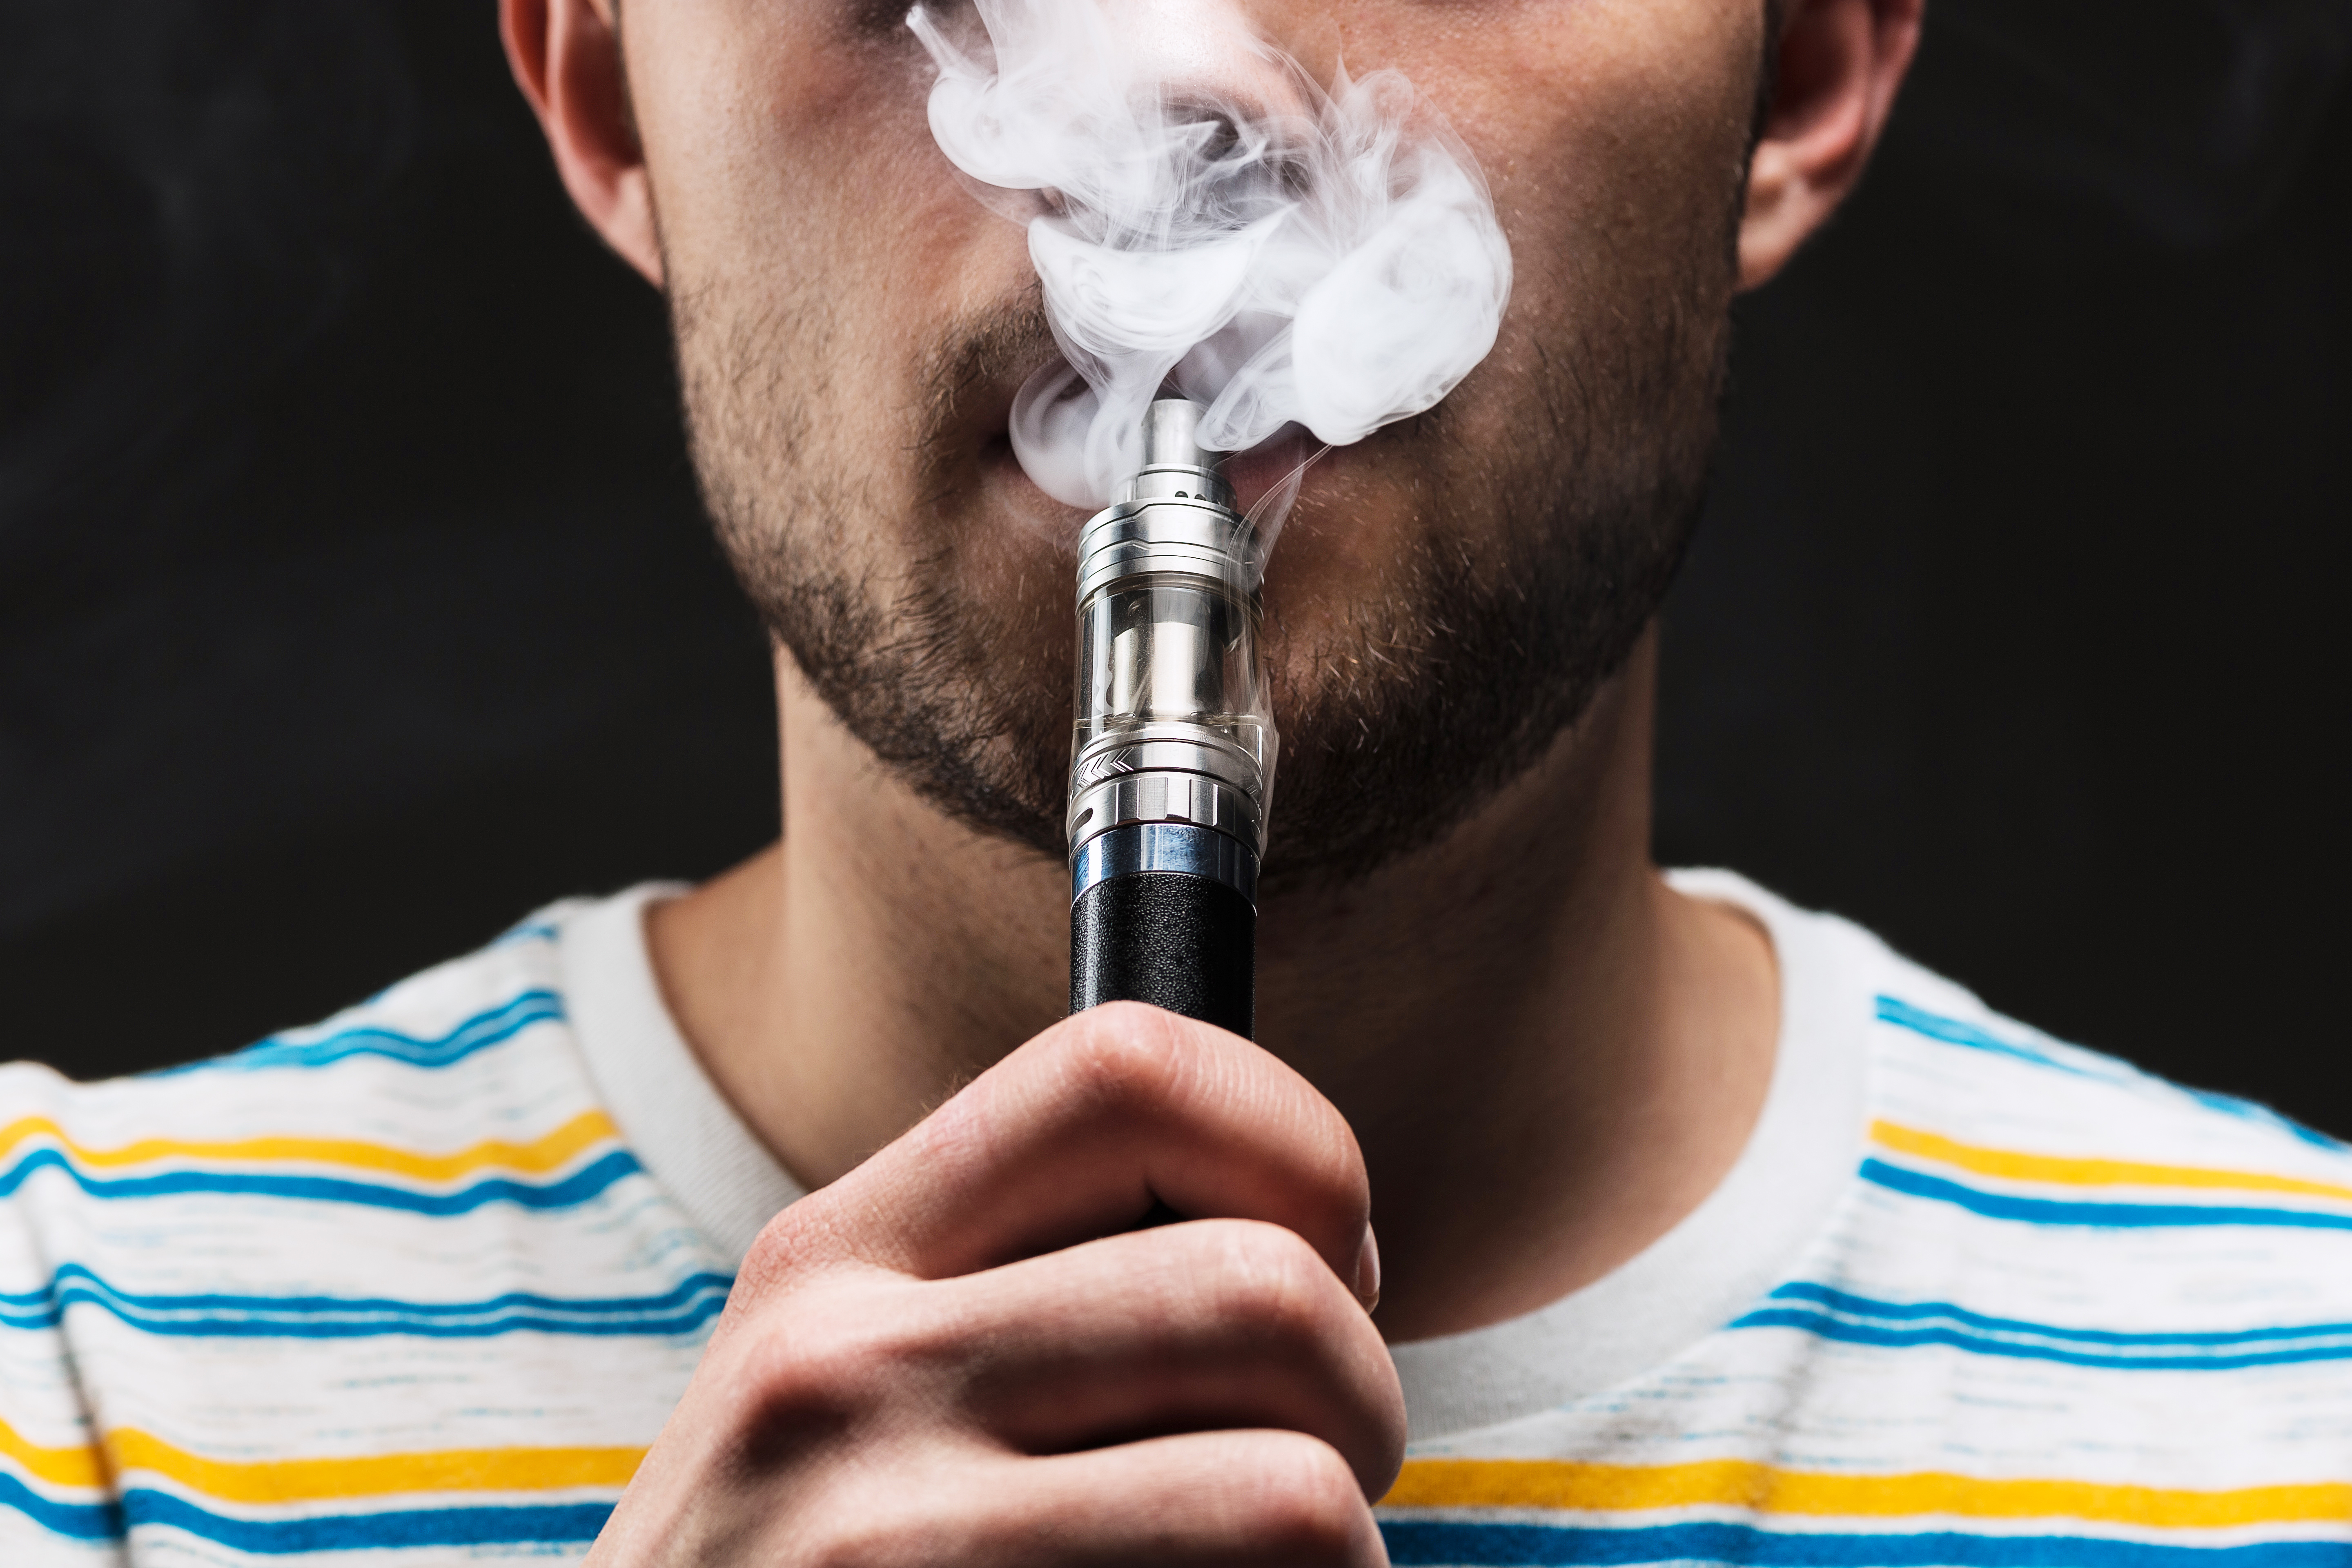 Article image for Vaping danger: Flavoured e-cigarettes without nicotine cause permanent damage